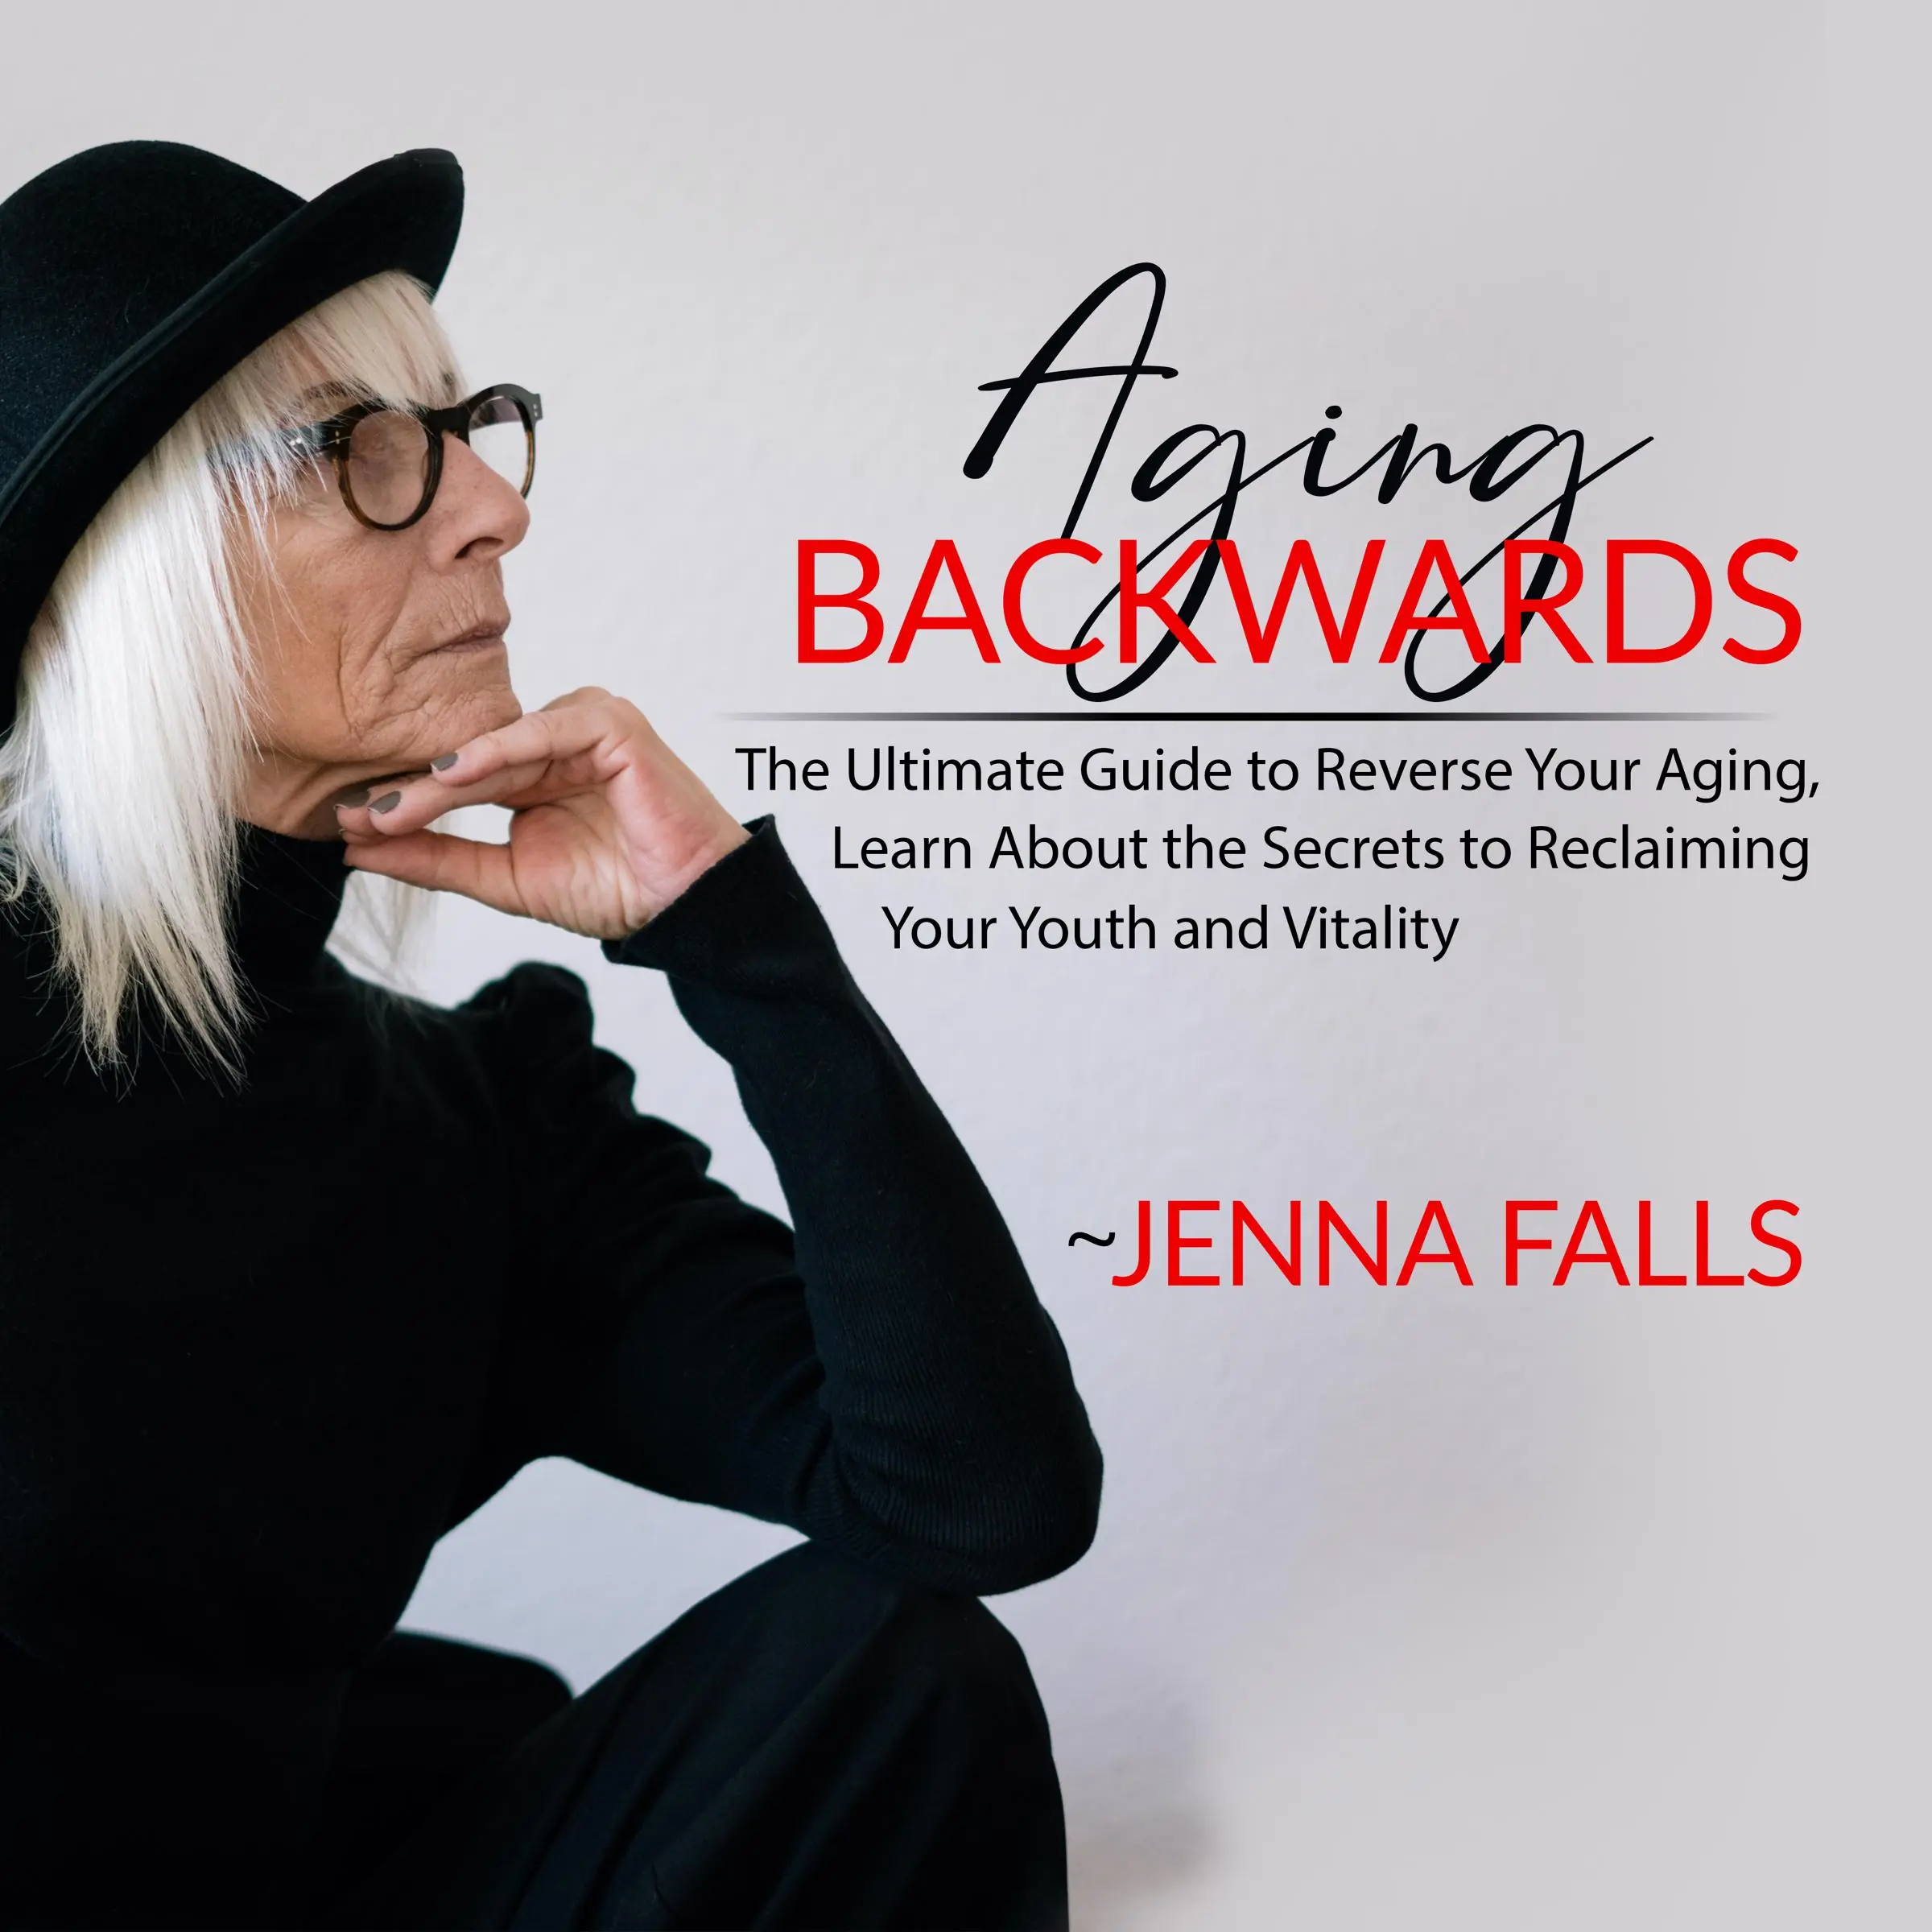 Aging Backwards: The Ultimate Guide to Reverse Your Aging, Learn About the Secrets to Reclaiming Your Youth and Vitality by Jenna Falls Audiobook